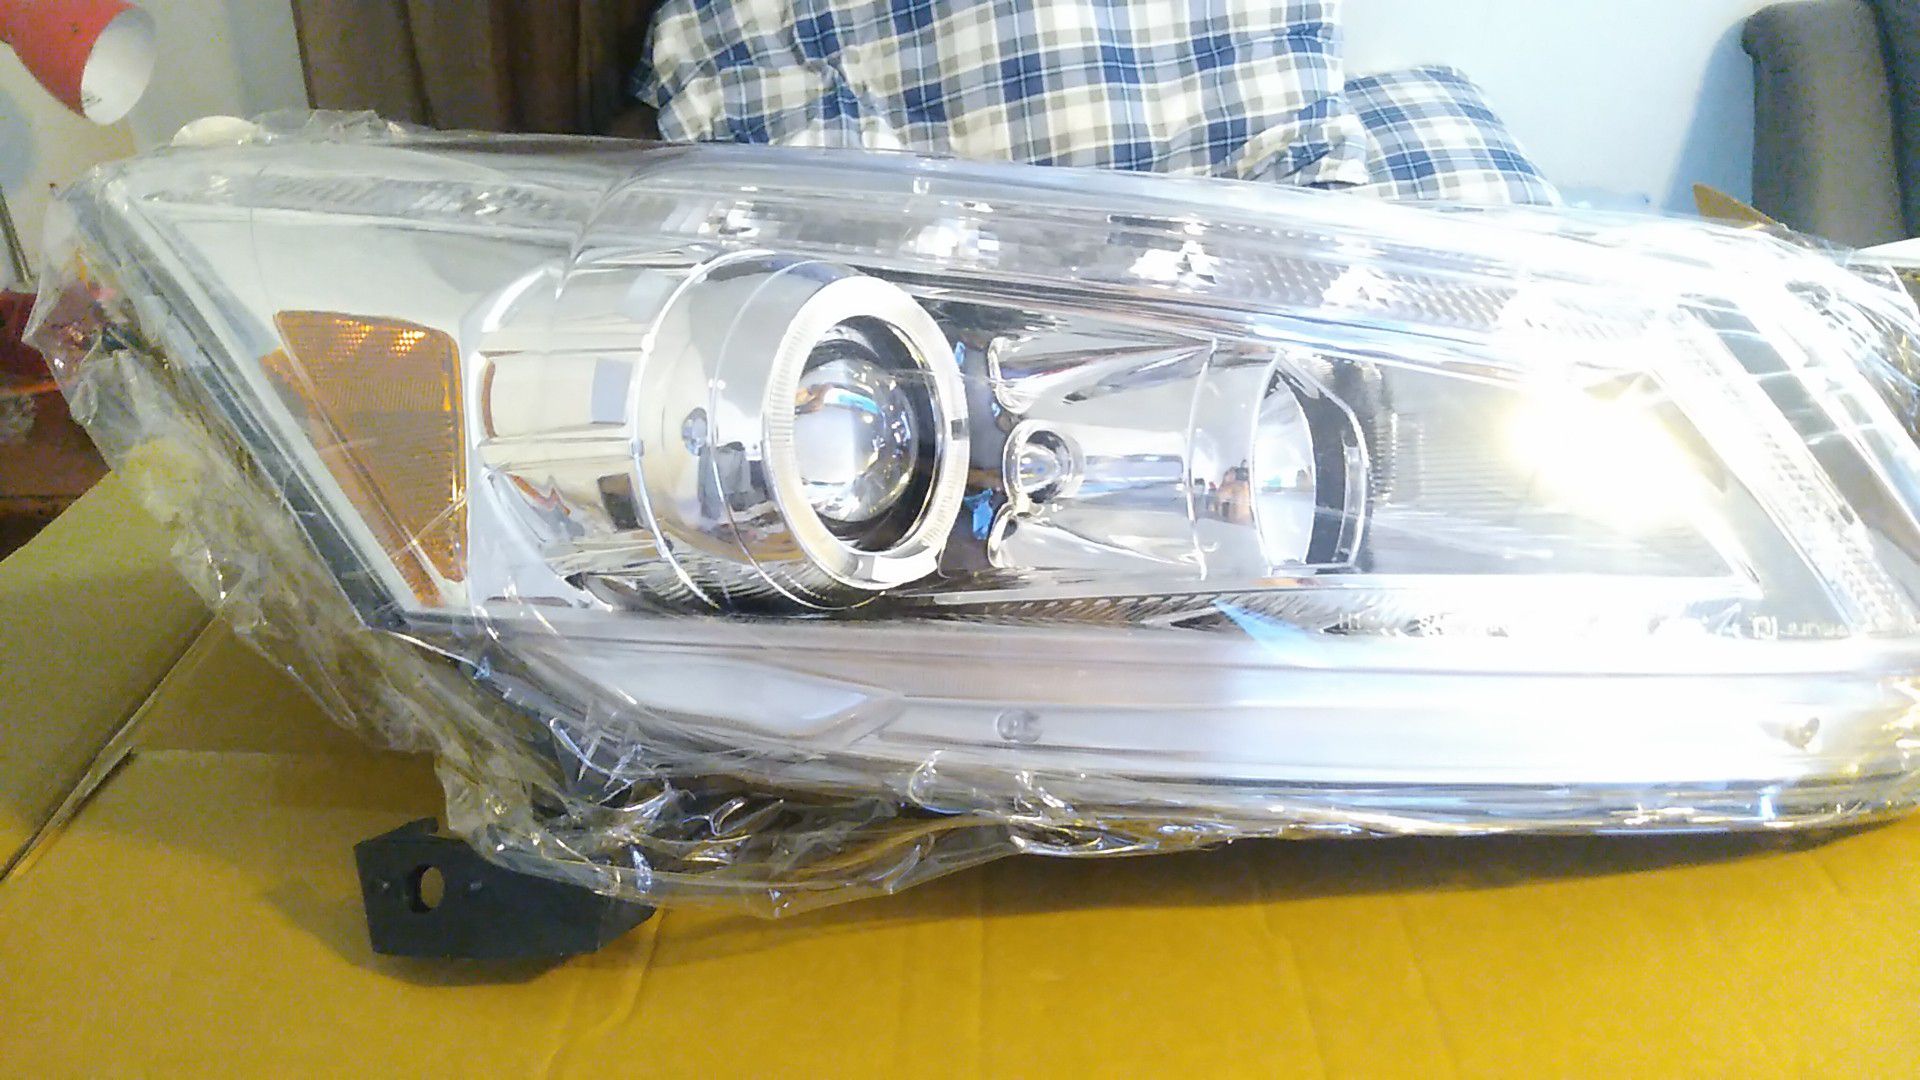 BRAND NEW HONDA ACCORD PROJECTOR HEADLIGHTS!! Spec-D tuning, 2008and up Honda Accord {url removed} box never used with instructions . .